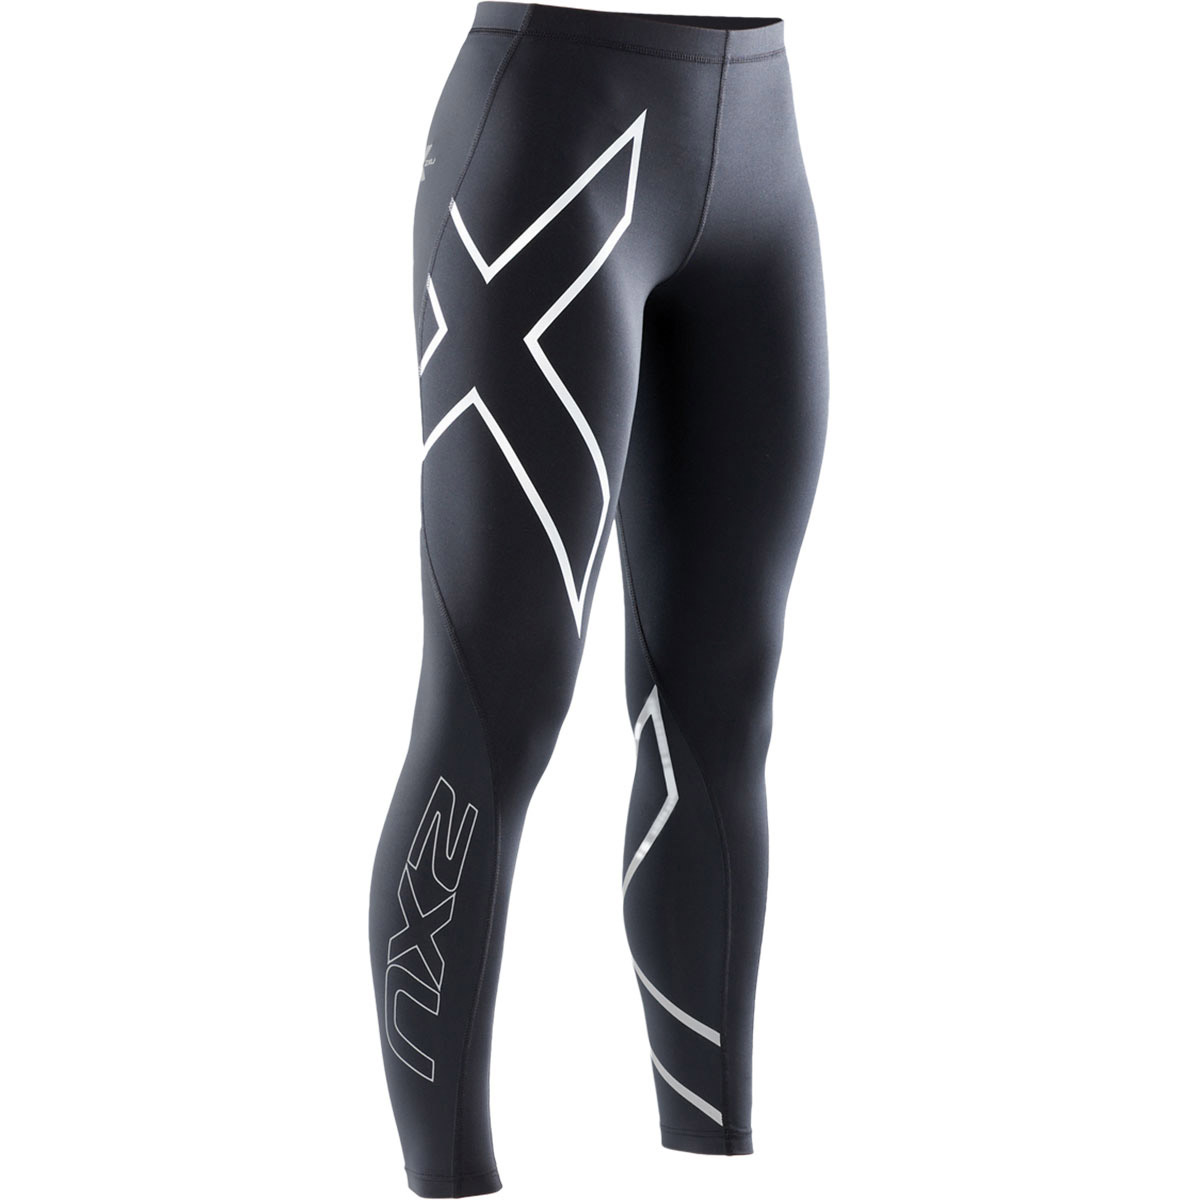 2XU Thermal Compression Tights - Eastern Mountain Sports